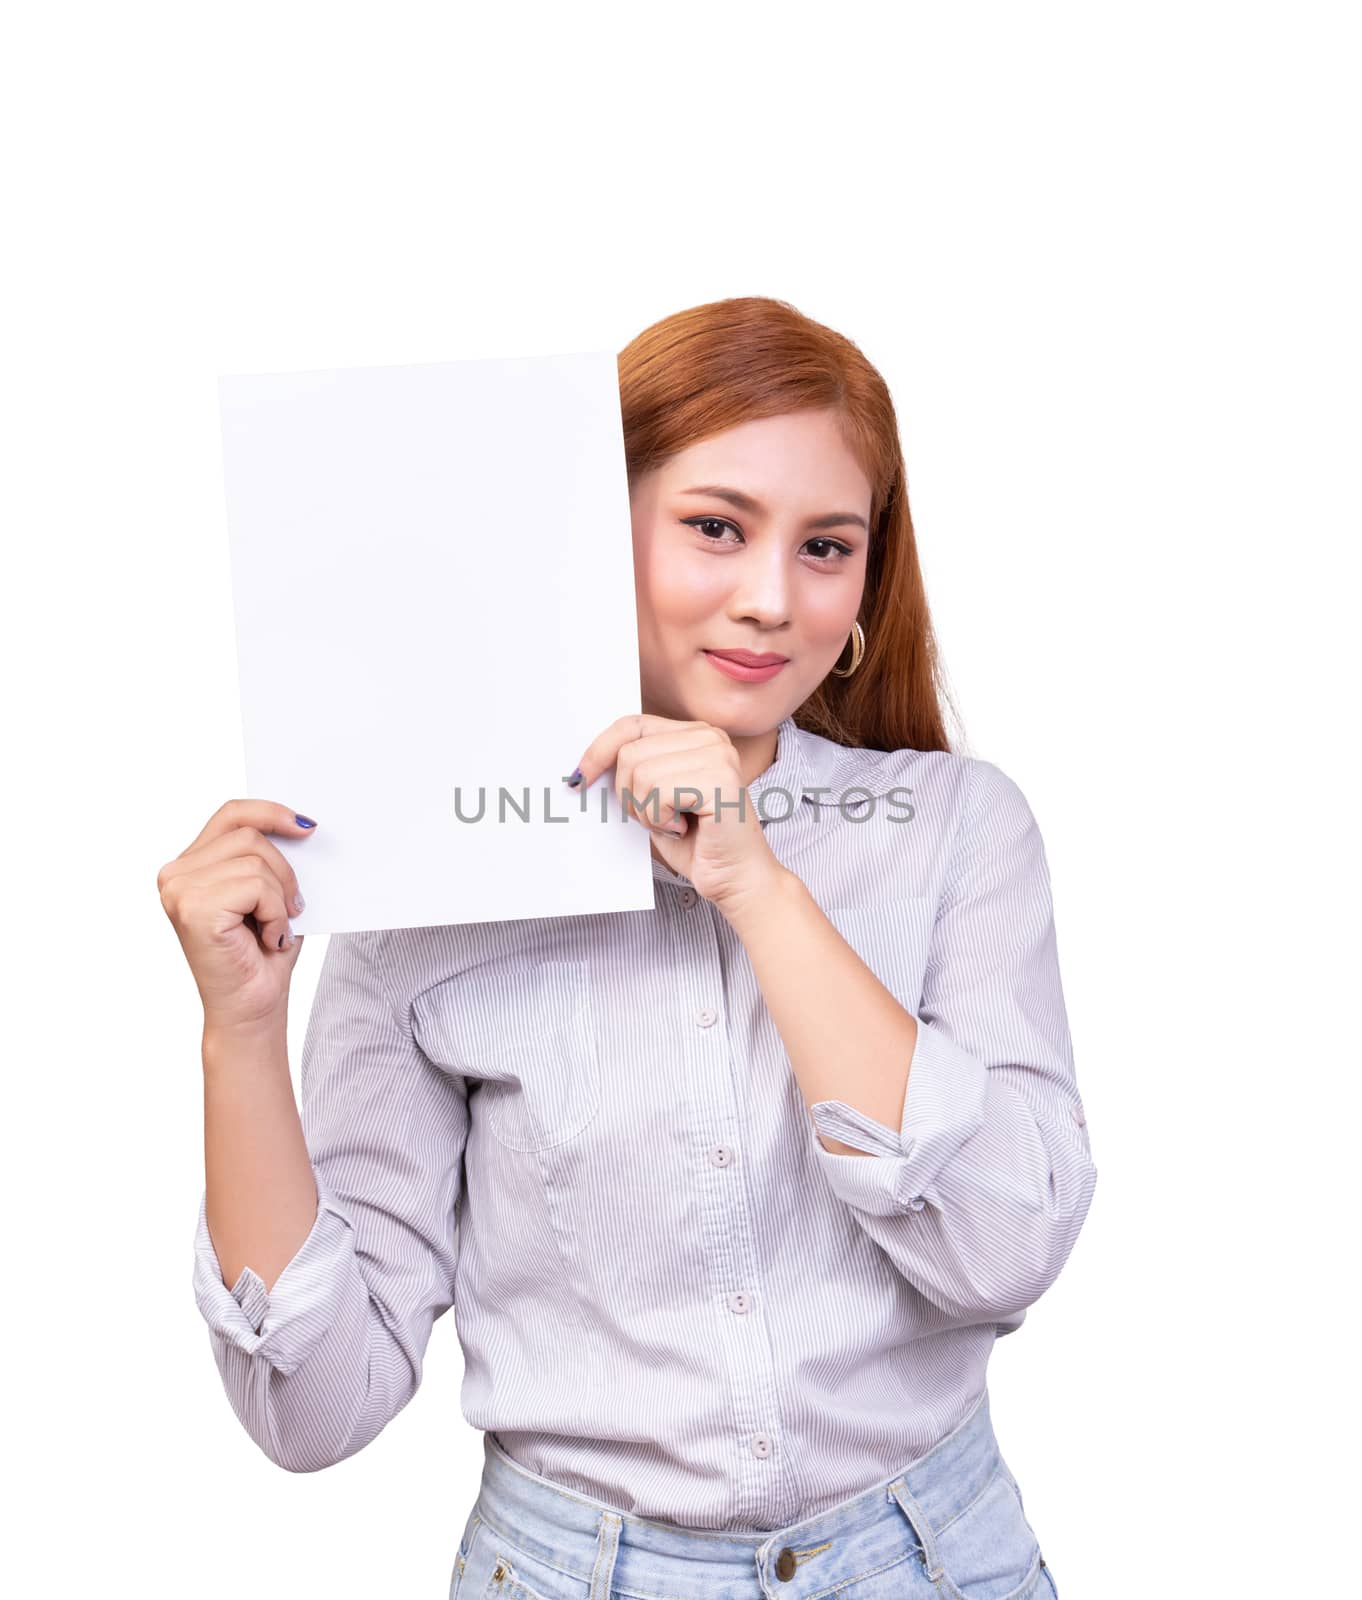 smiling Asian woman holding blank white banner, business sign board  paper with clipping path. studio portrait of beautiful female model with long hair